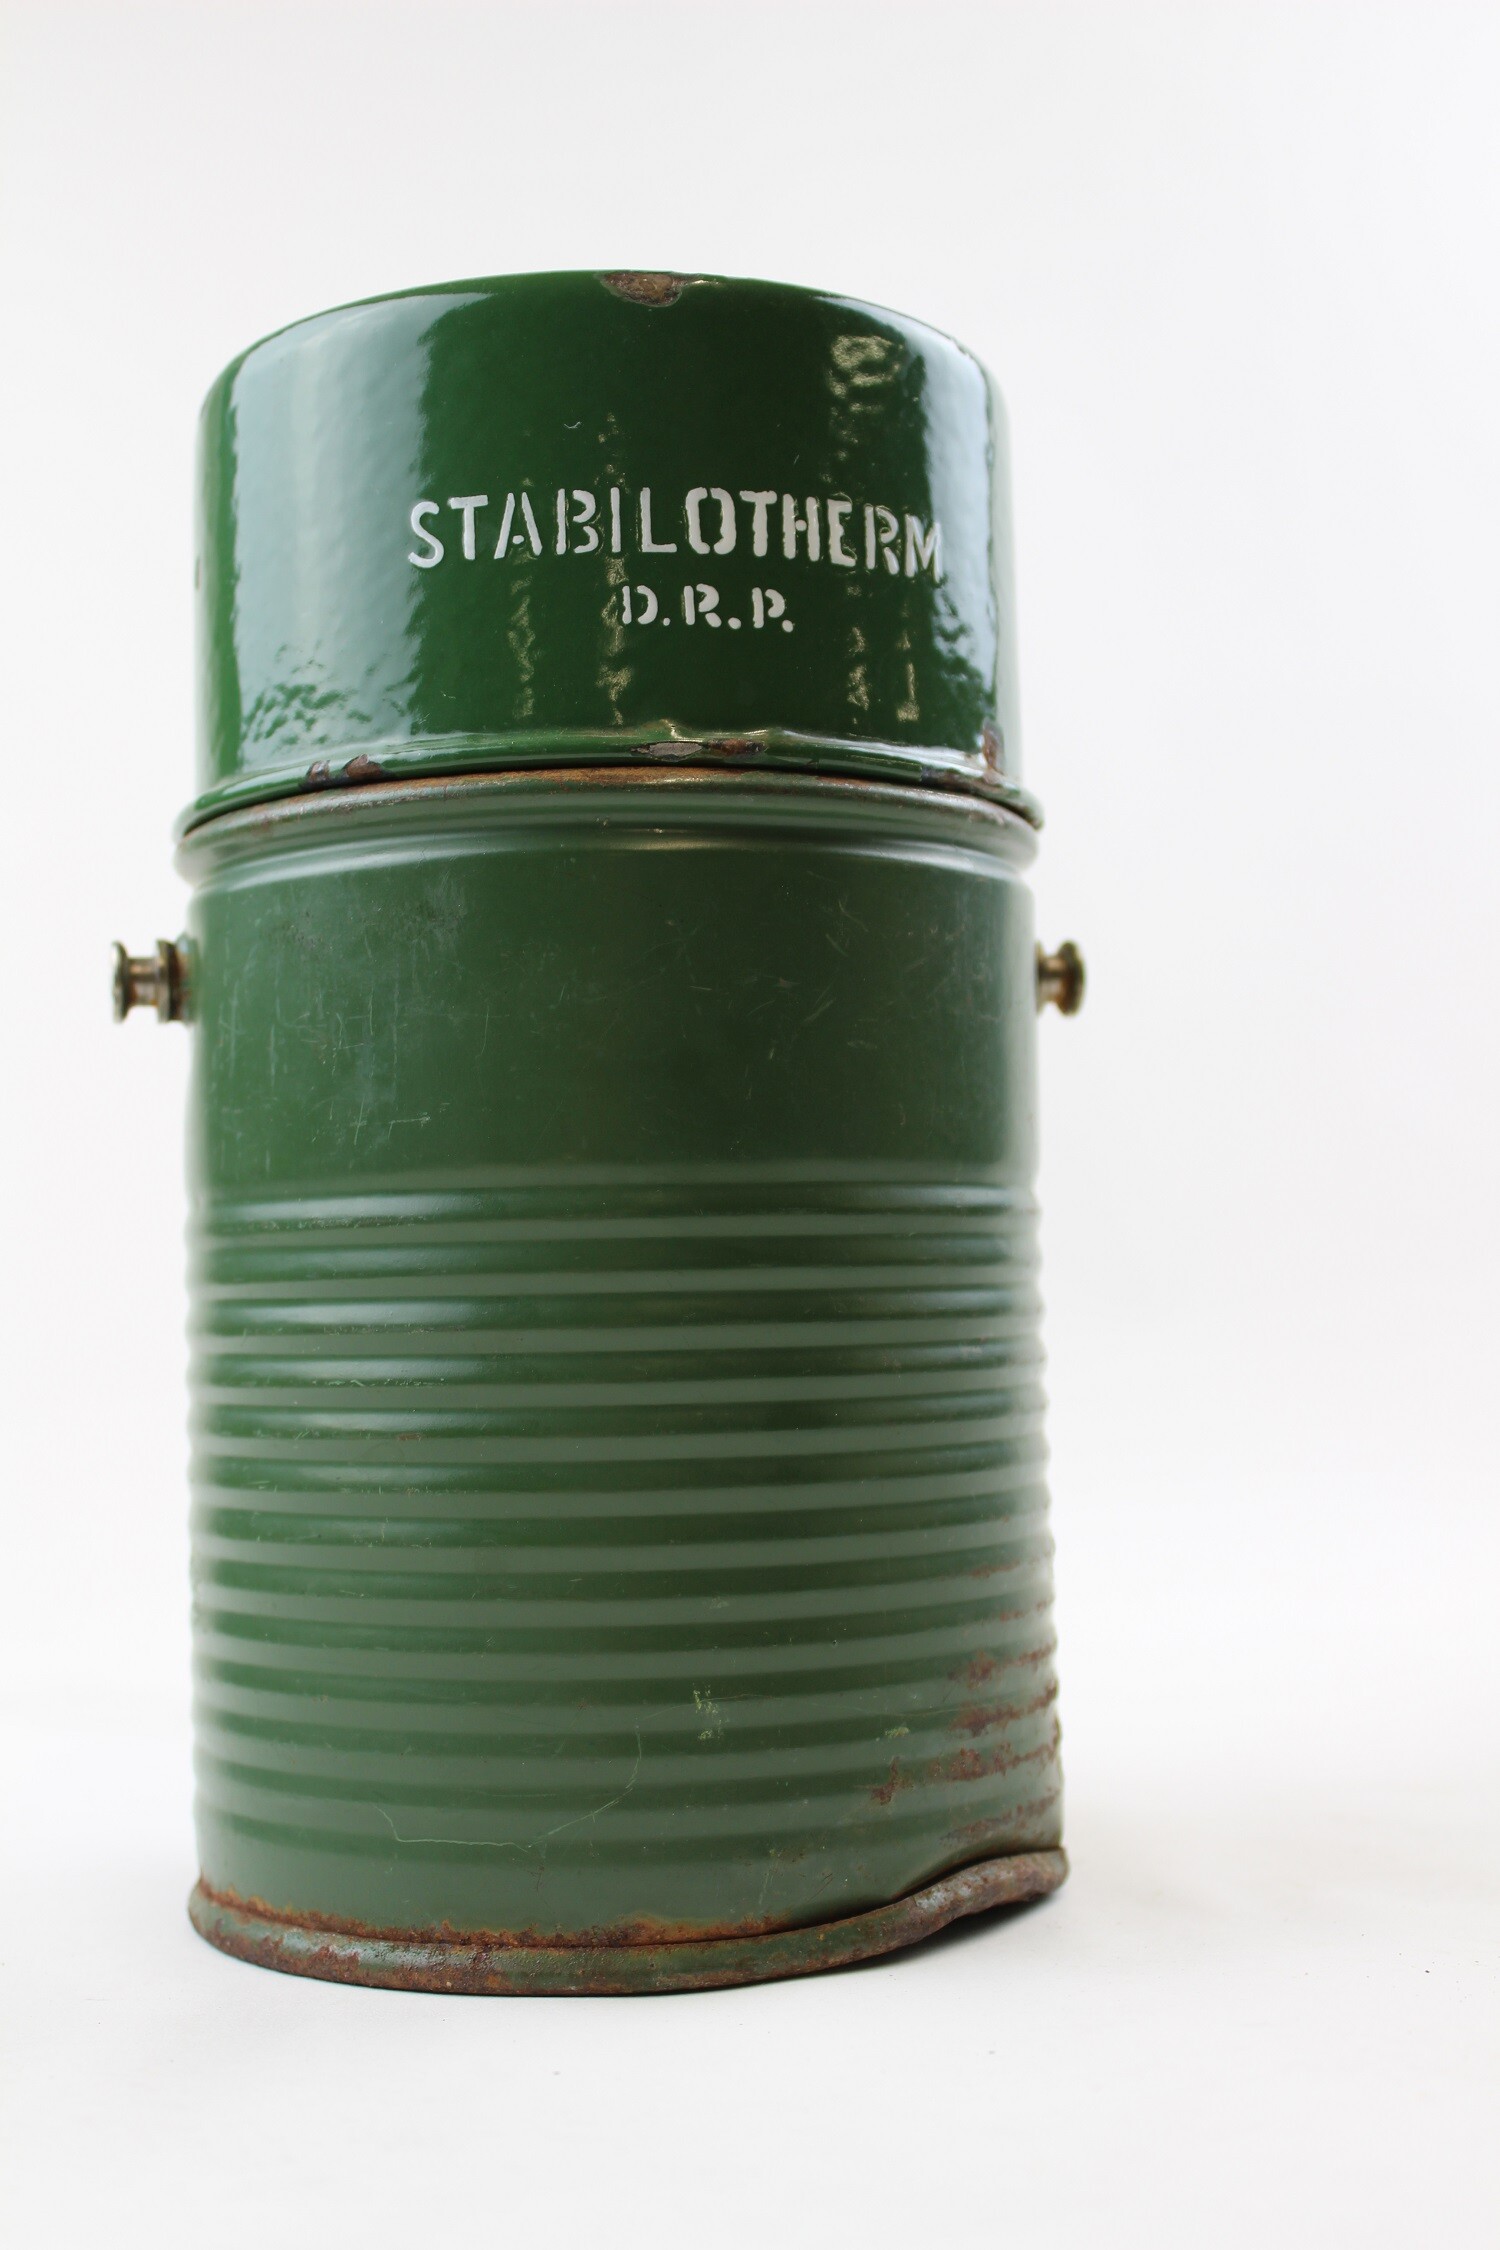 Stabilotherm-Thermosflasche (Museum Baruther Glashütte CC BY-NC-SA)